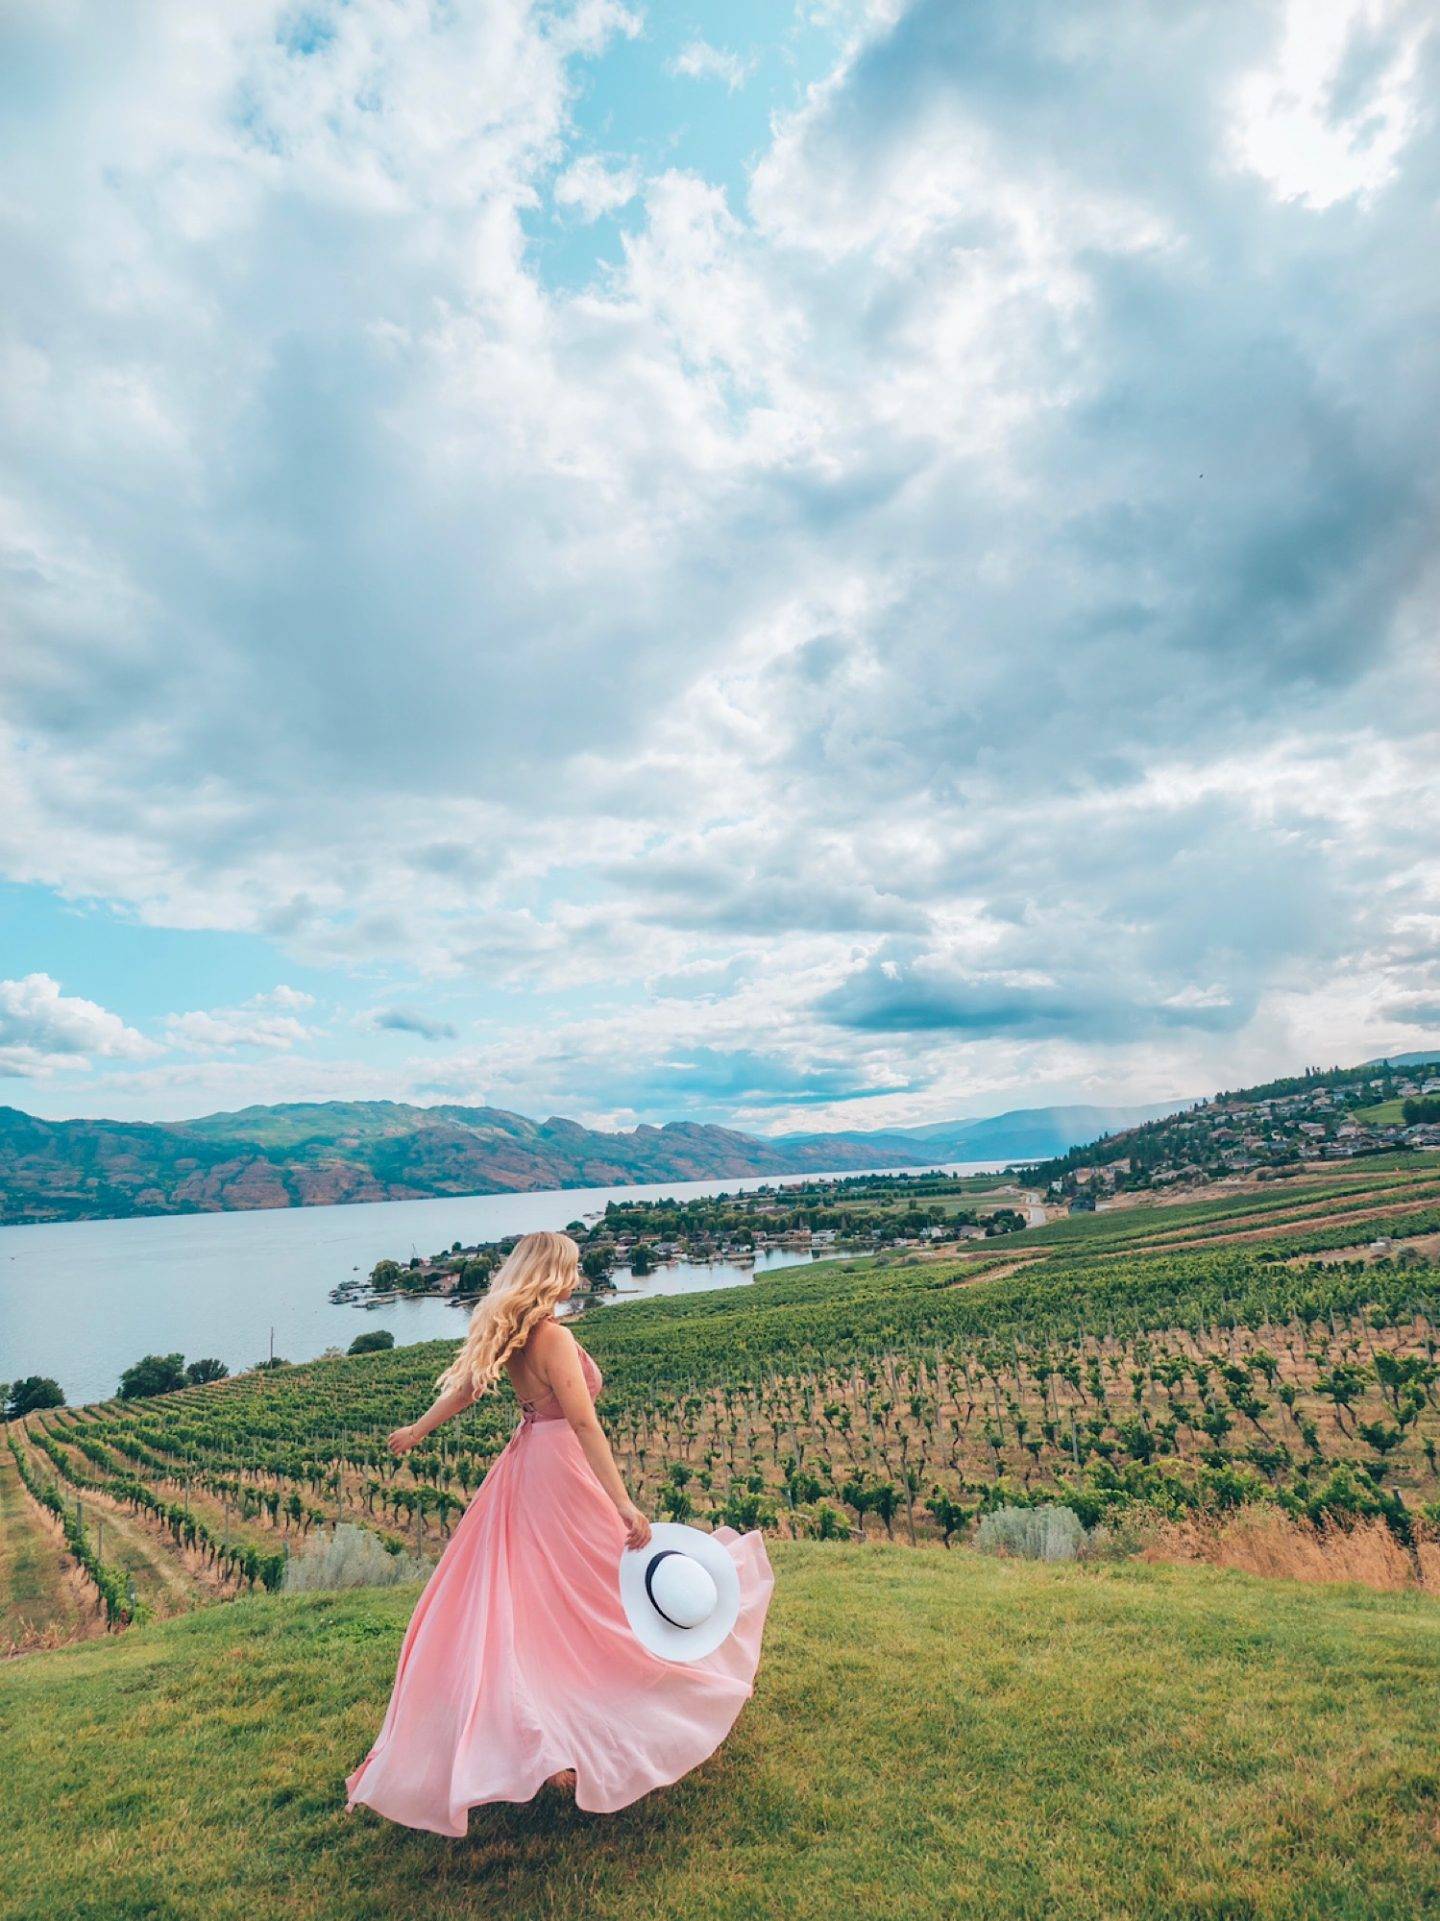 Quail's Gate Winery is the perfect daytime activity to do while in Kelowna